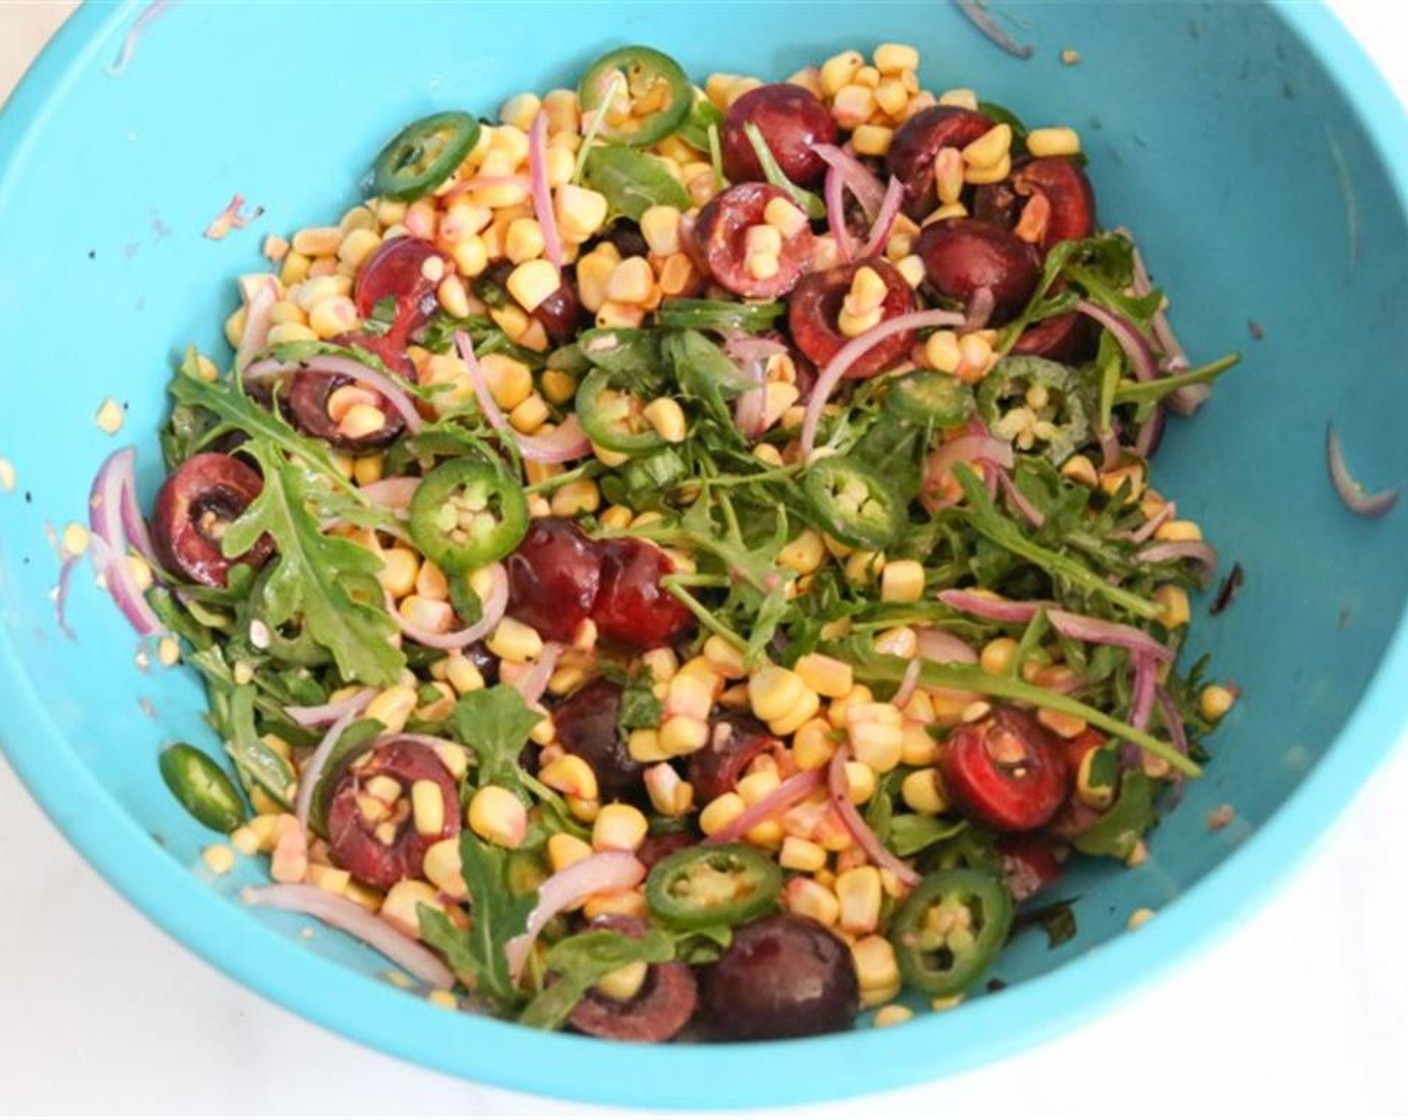 step 4 Carefully slice the kernels from each ear of Sweet Corn (2 ears) into a large mixing bowl. Add the Sweet Cherries (2 cups), very thinly sliced Red Onion (1/4 cup), Jalapeño Pepper (1), Baby Arugula (1 cup) and Fresh Basil Leaves (8) to the bowl and toss to combine.